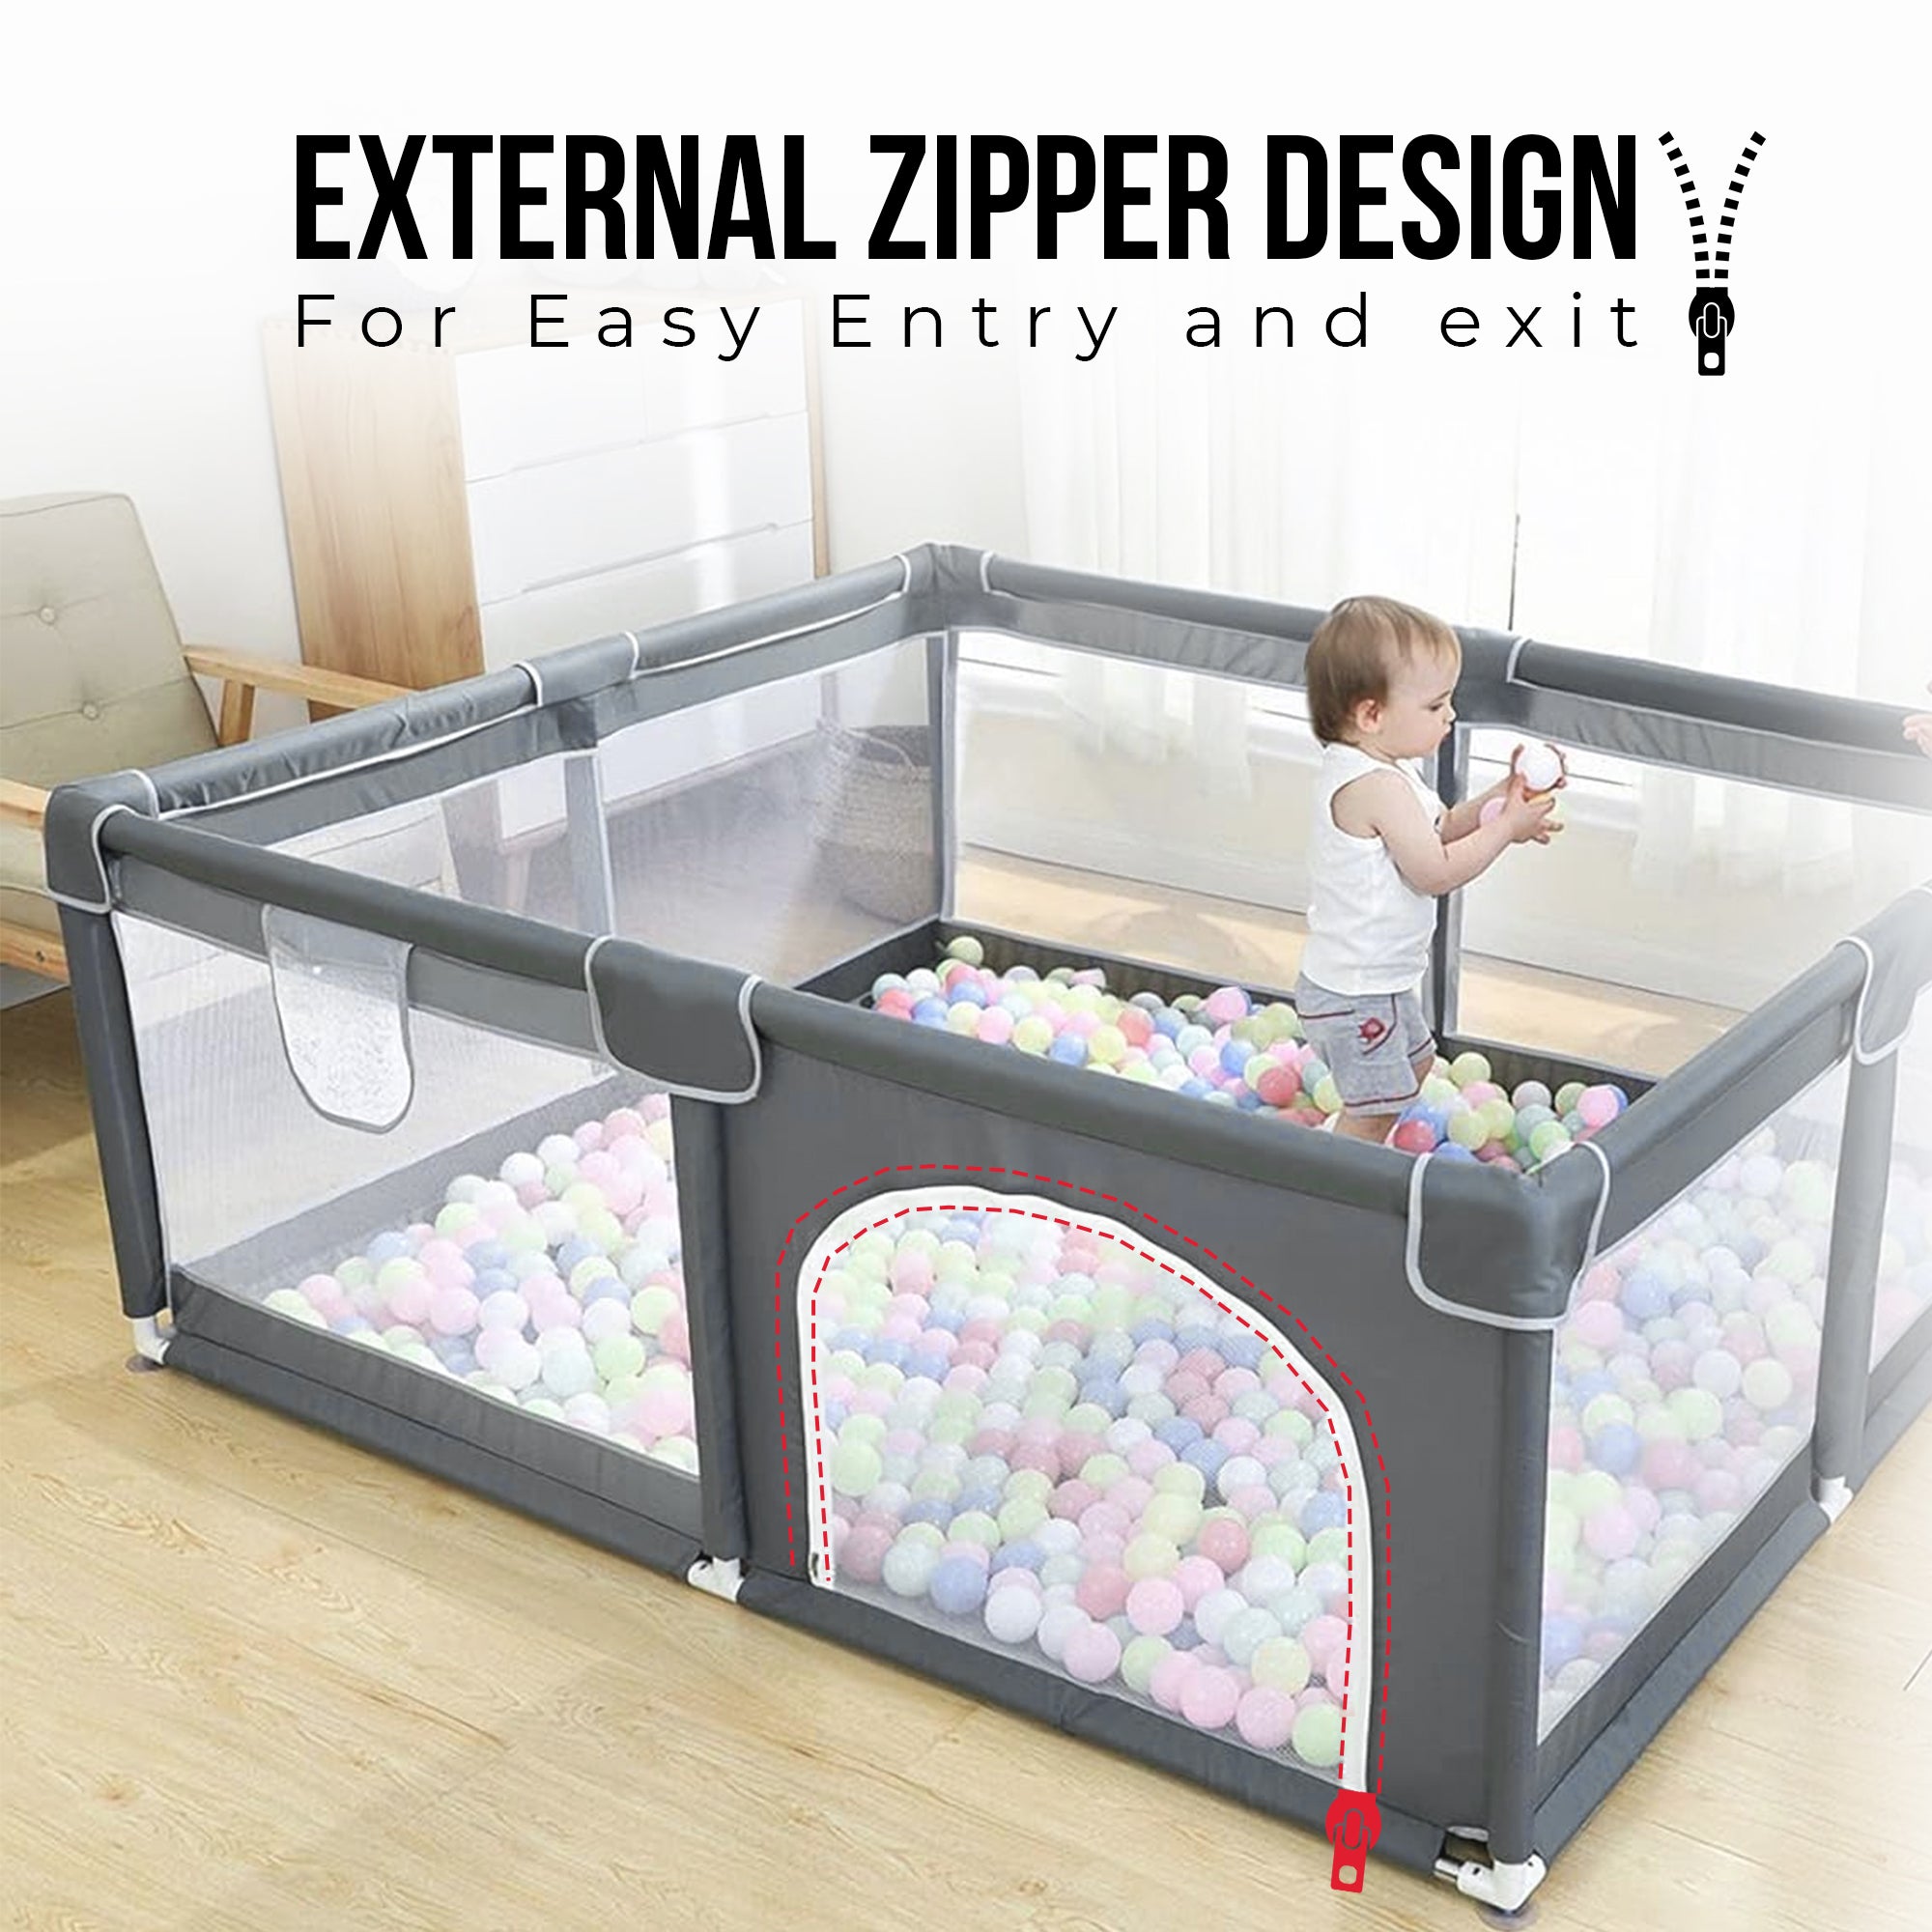 Playpen Baby Large Size Playpen, set up and fold down, Best Baby Playpen extra-large